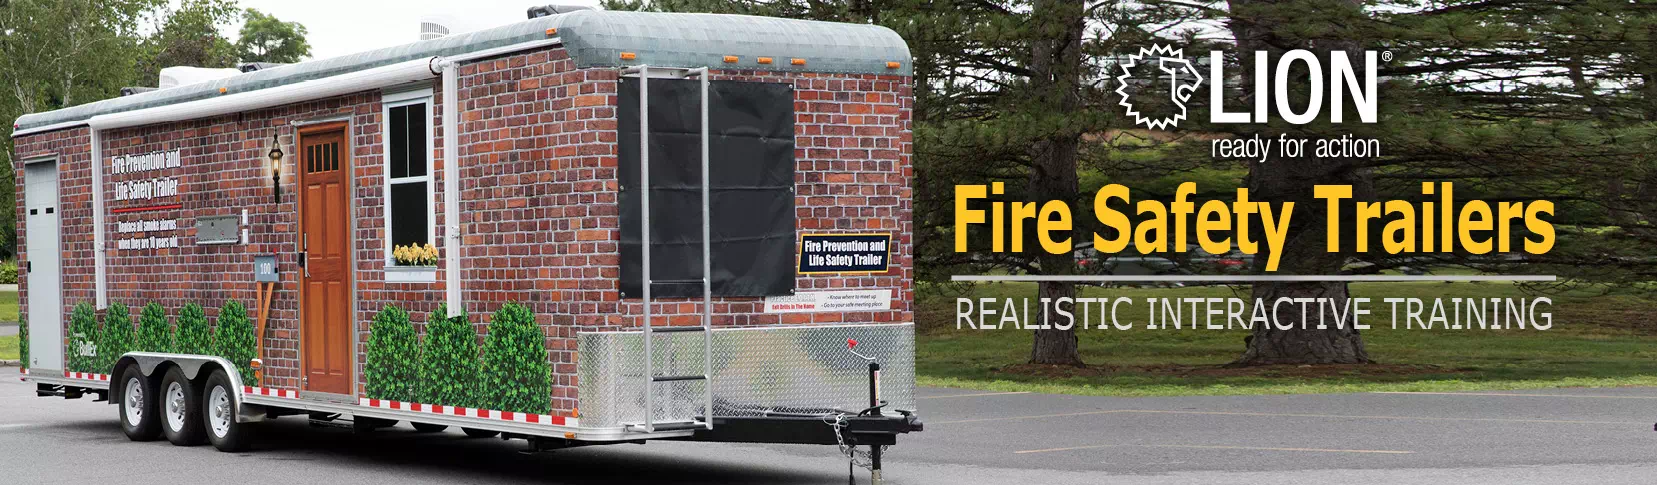 LION Fire Safety Trailers